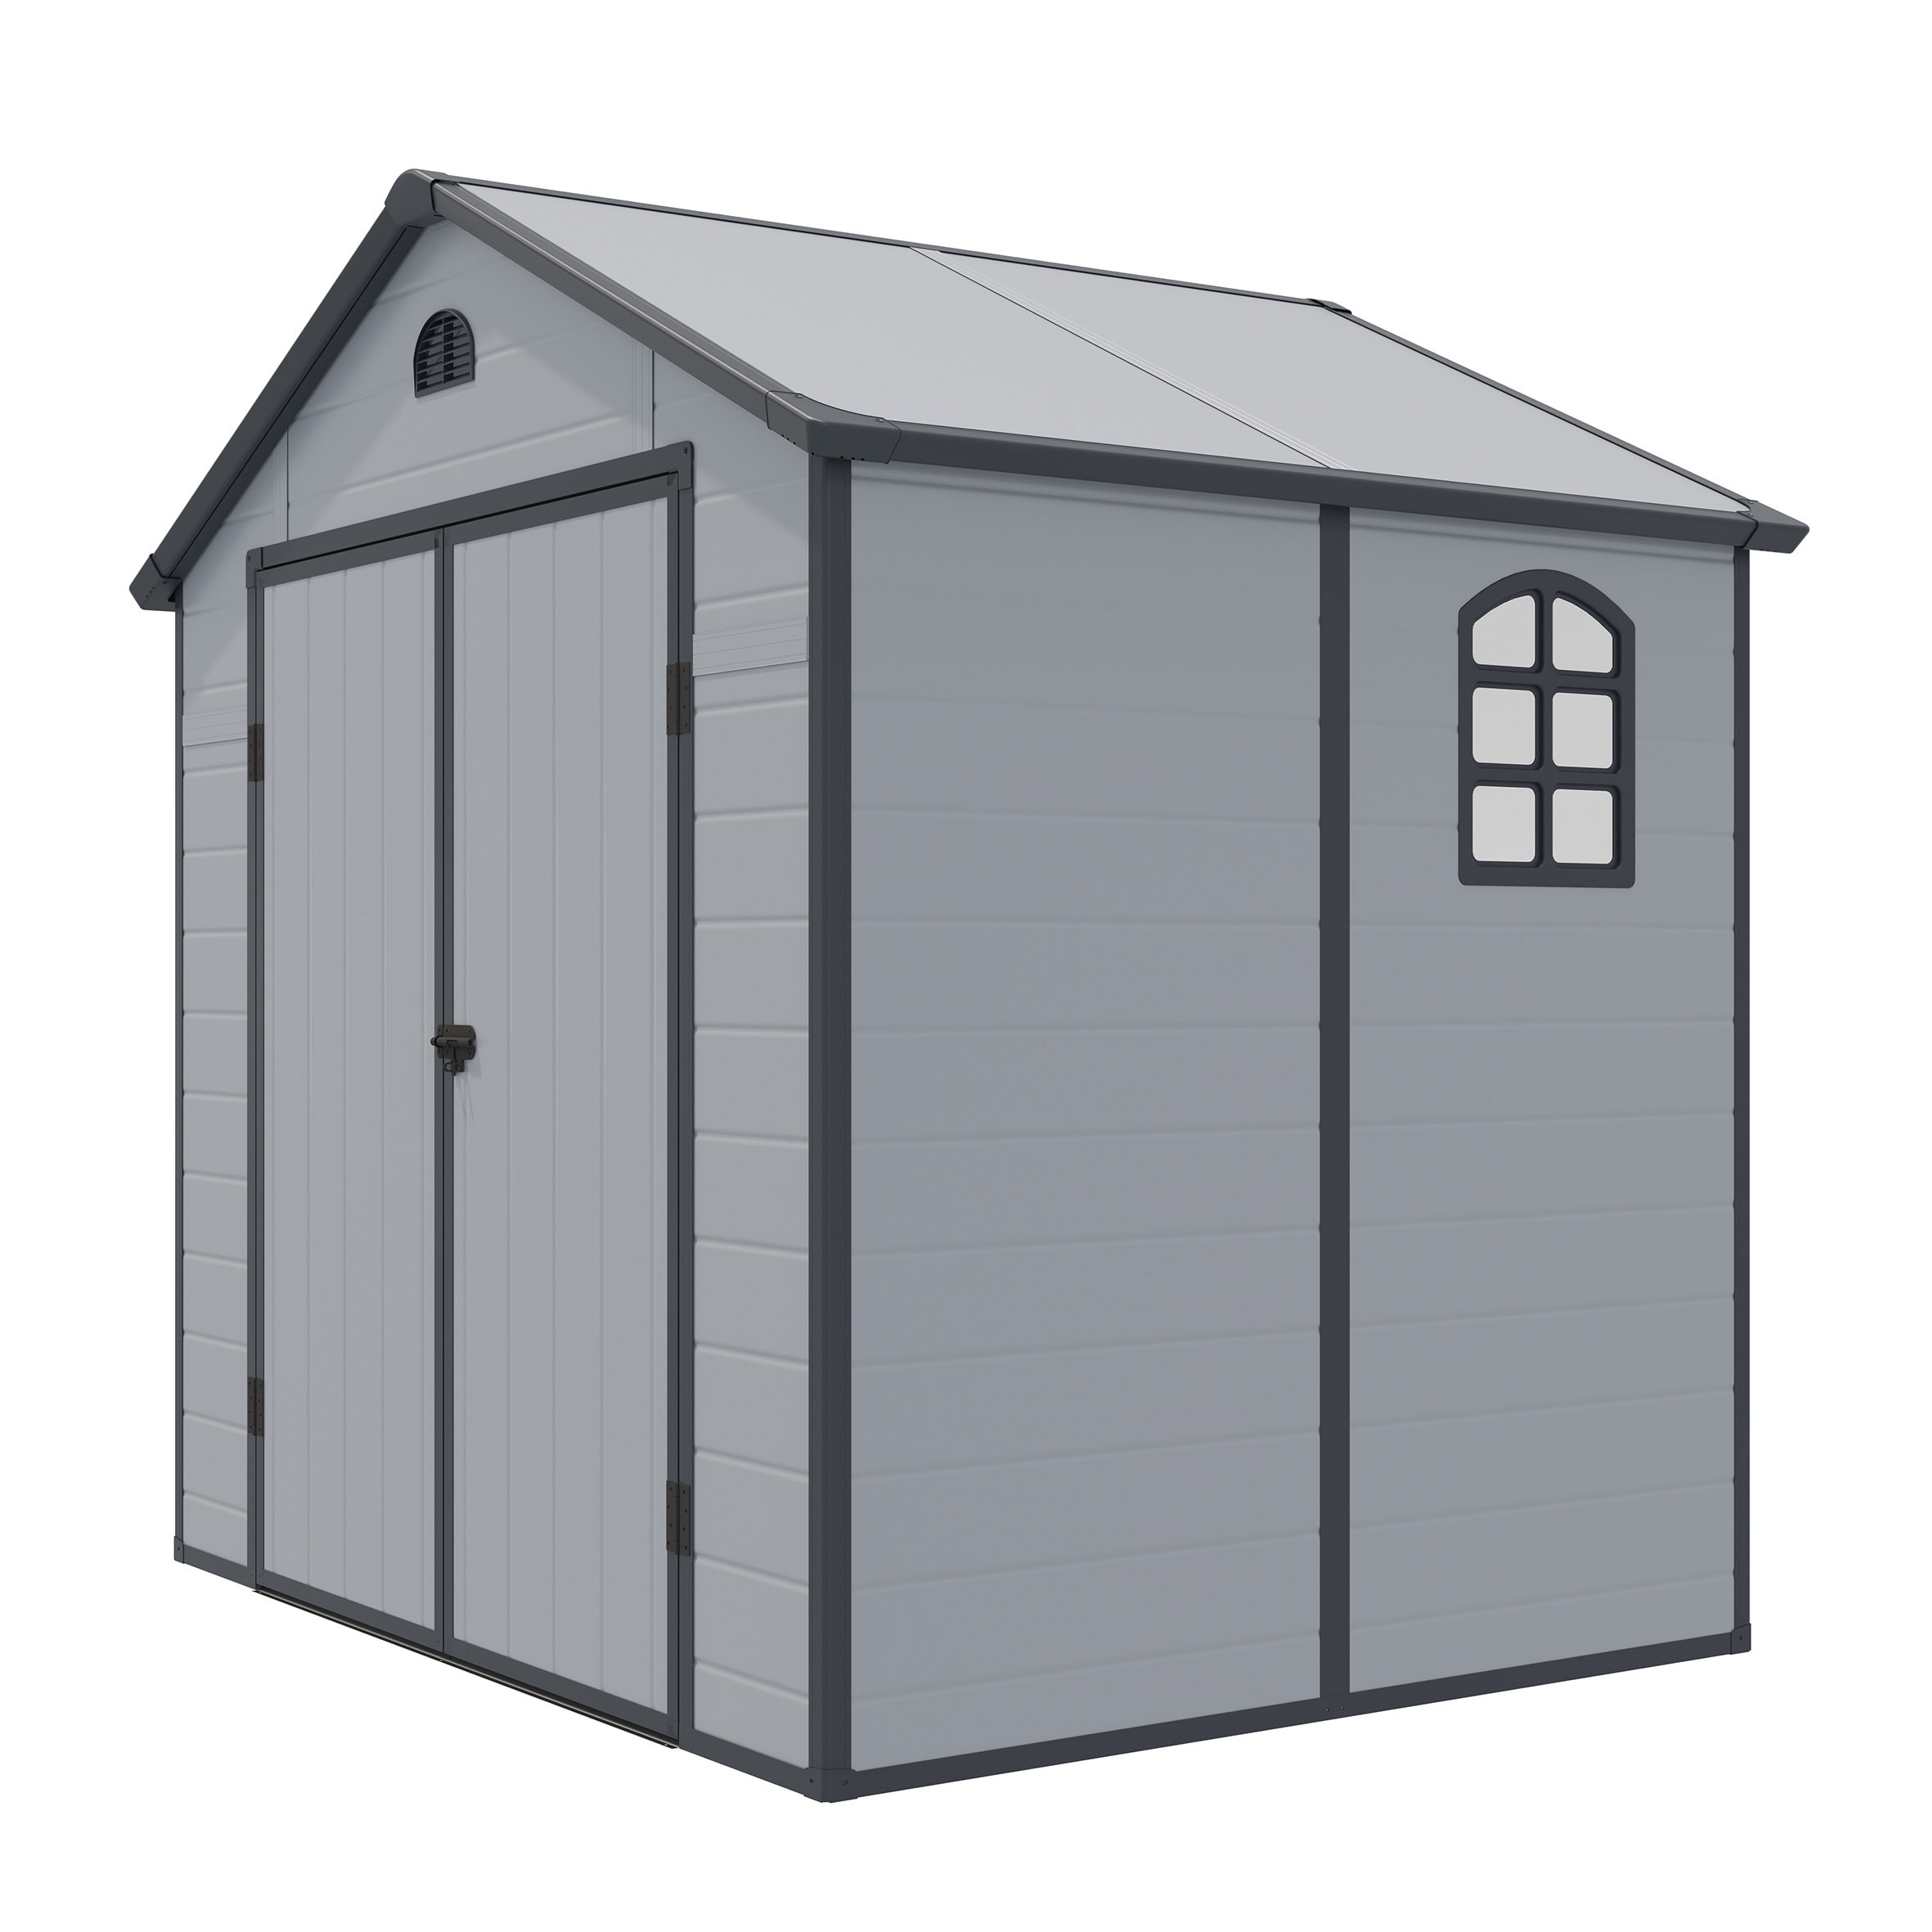 Featured image for “RGP | Airevale™ Apex Shed 8x6 (Light Grey)”